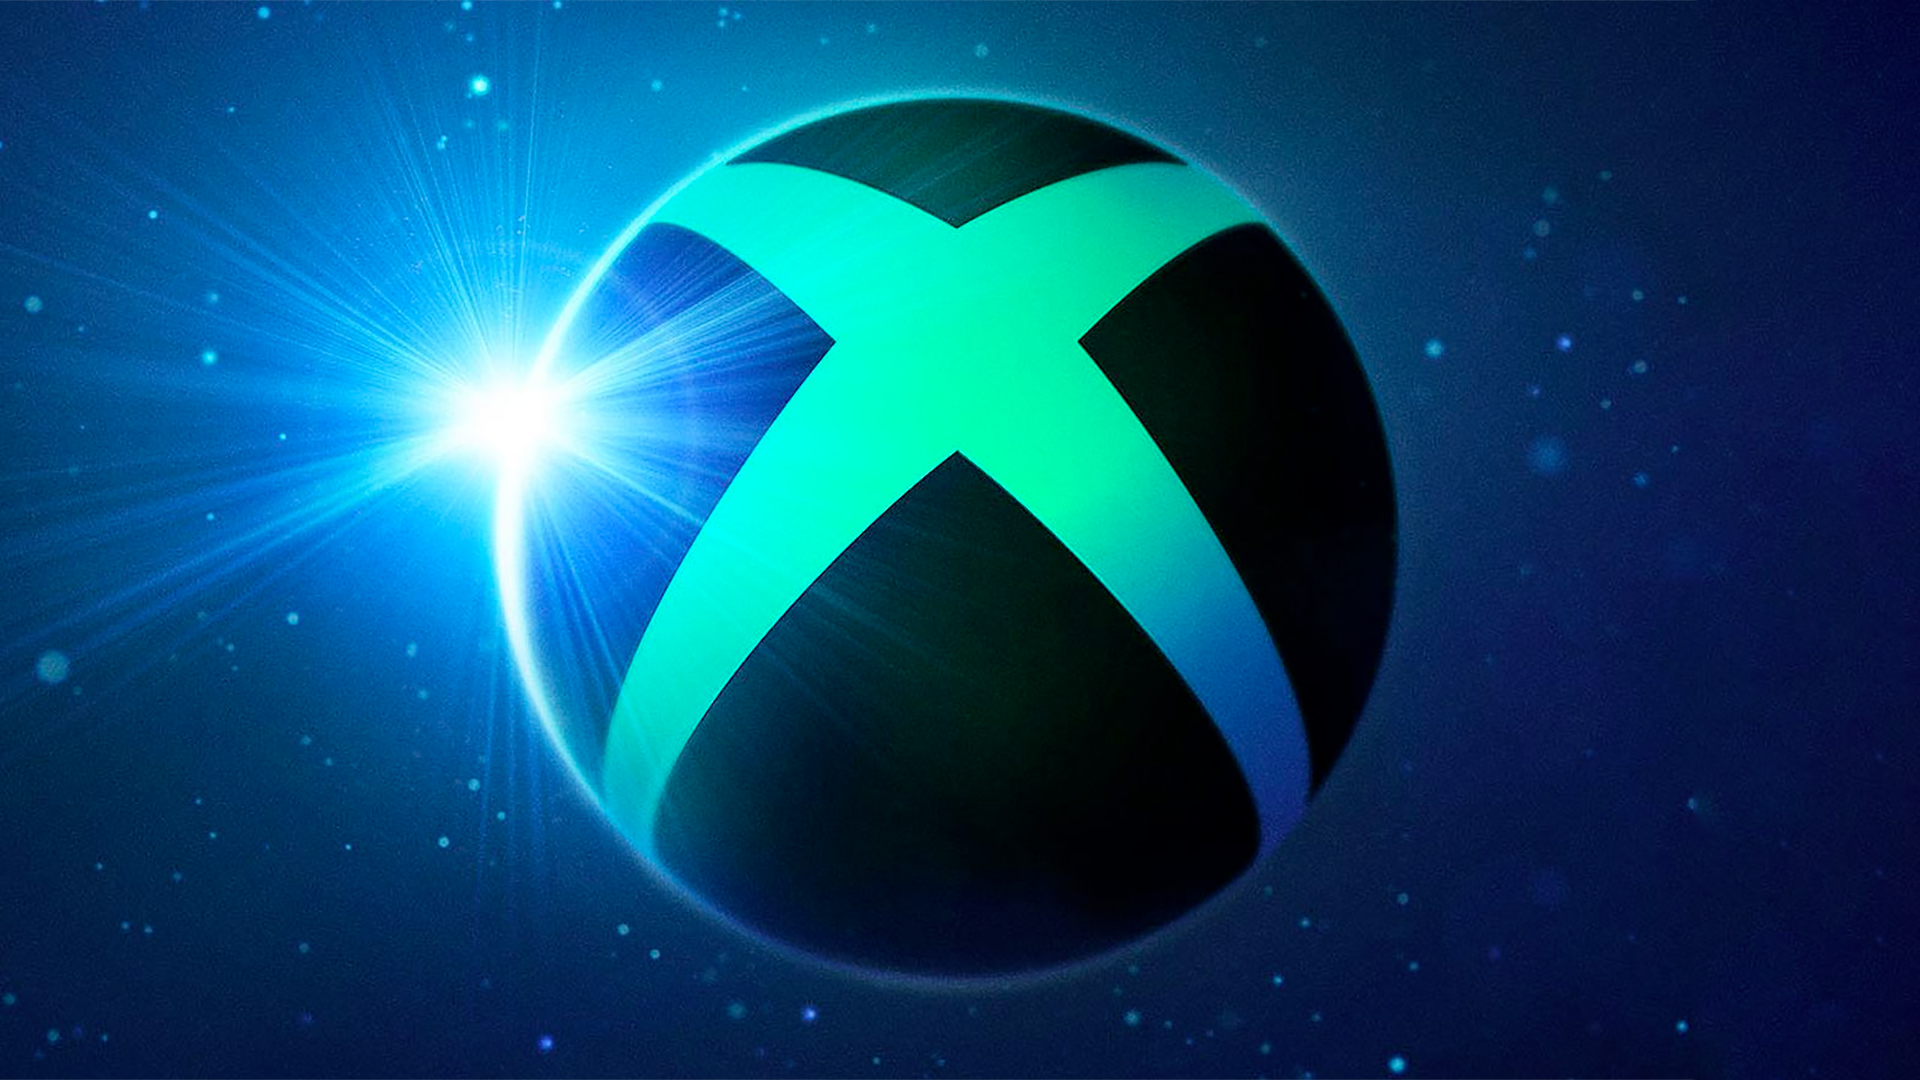 The Xbox logo on a starry background